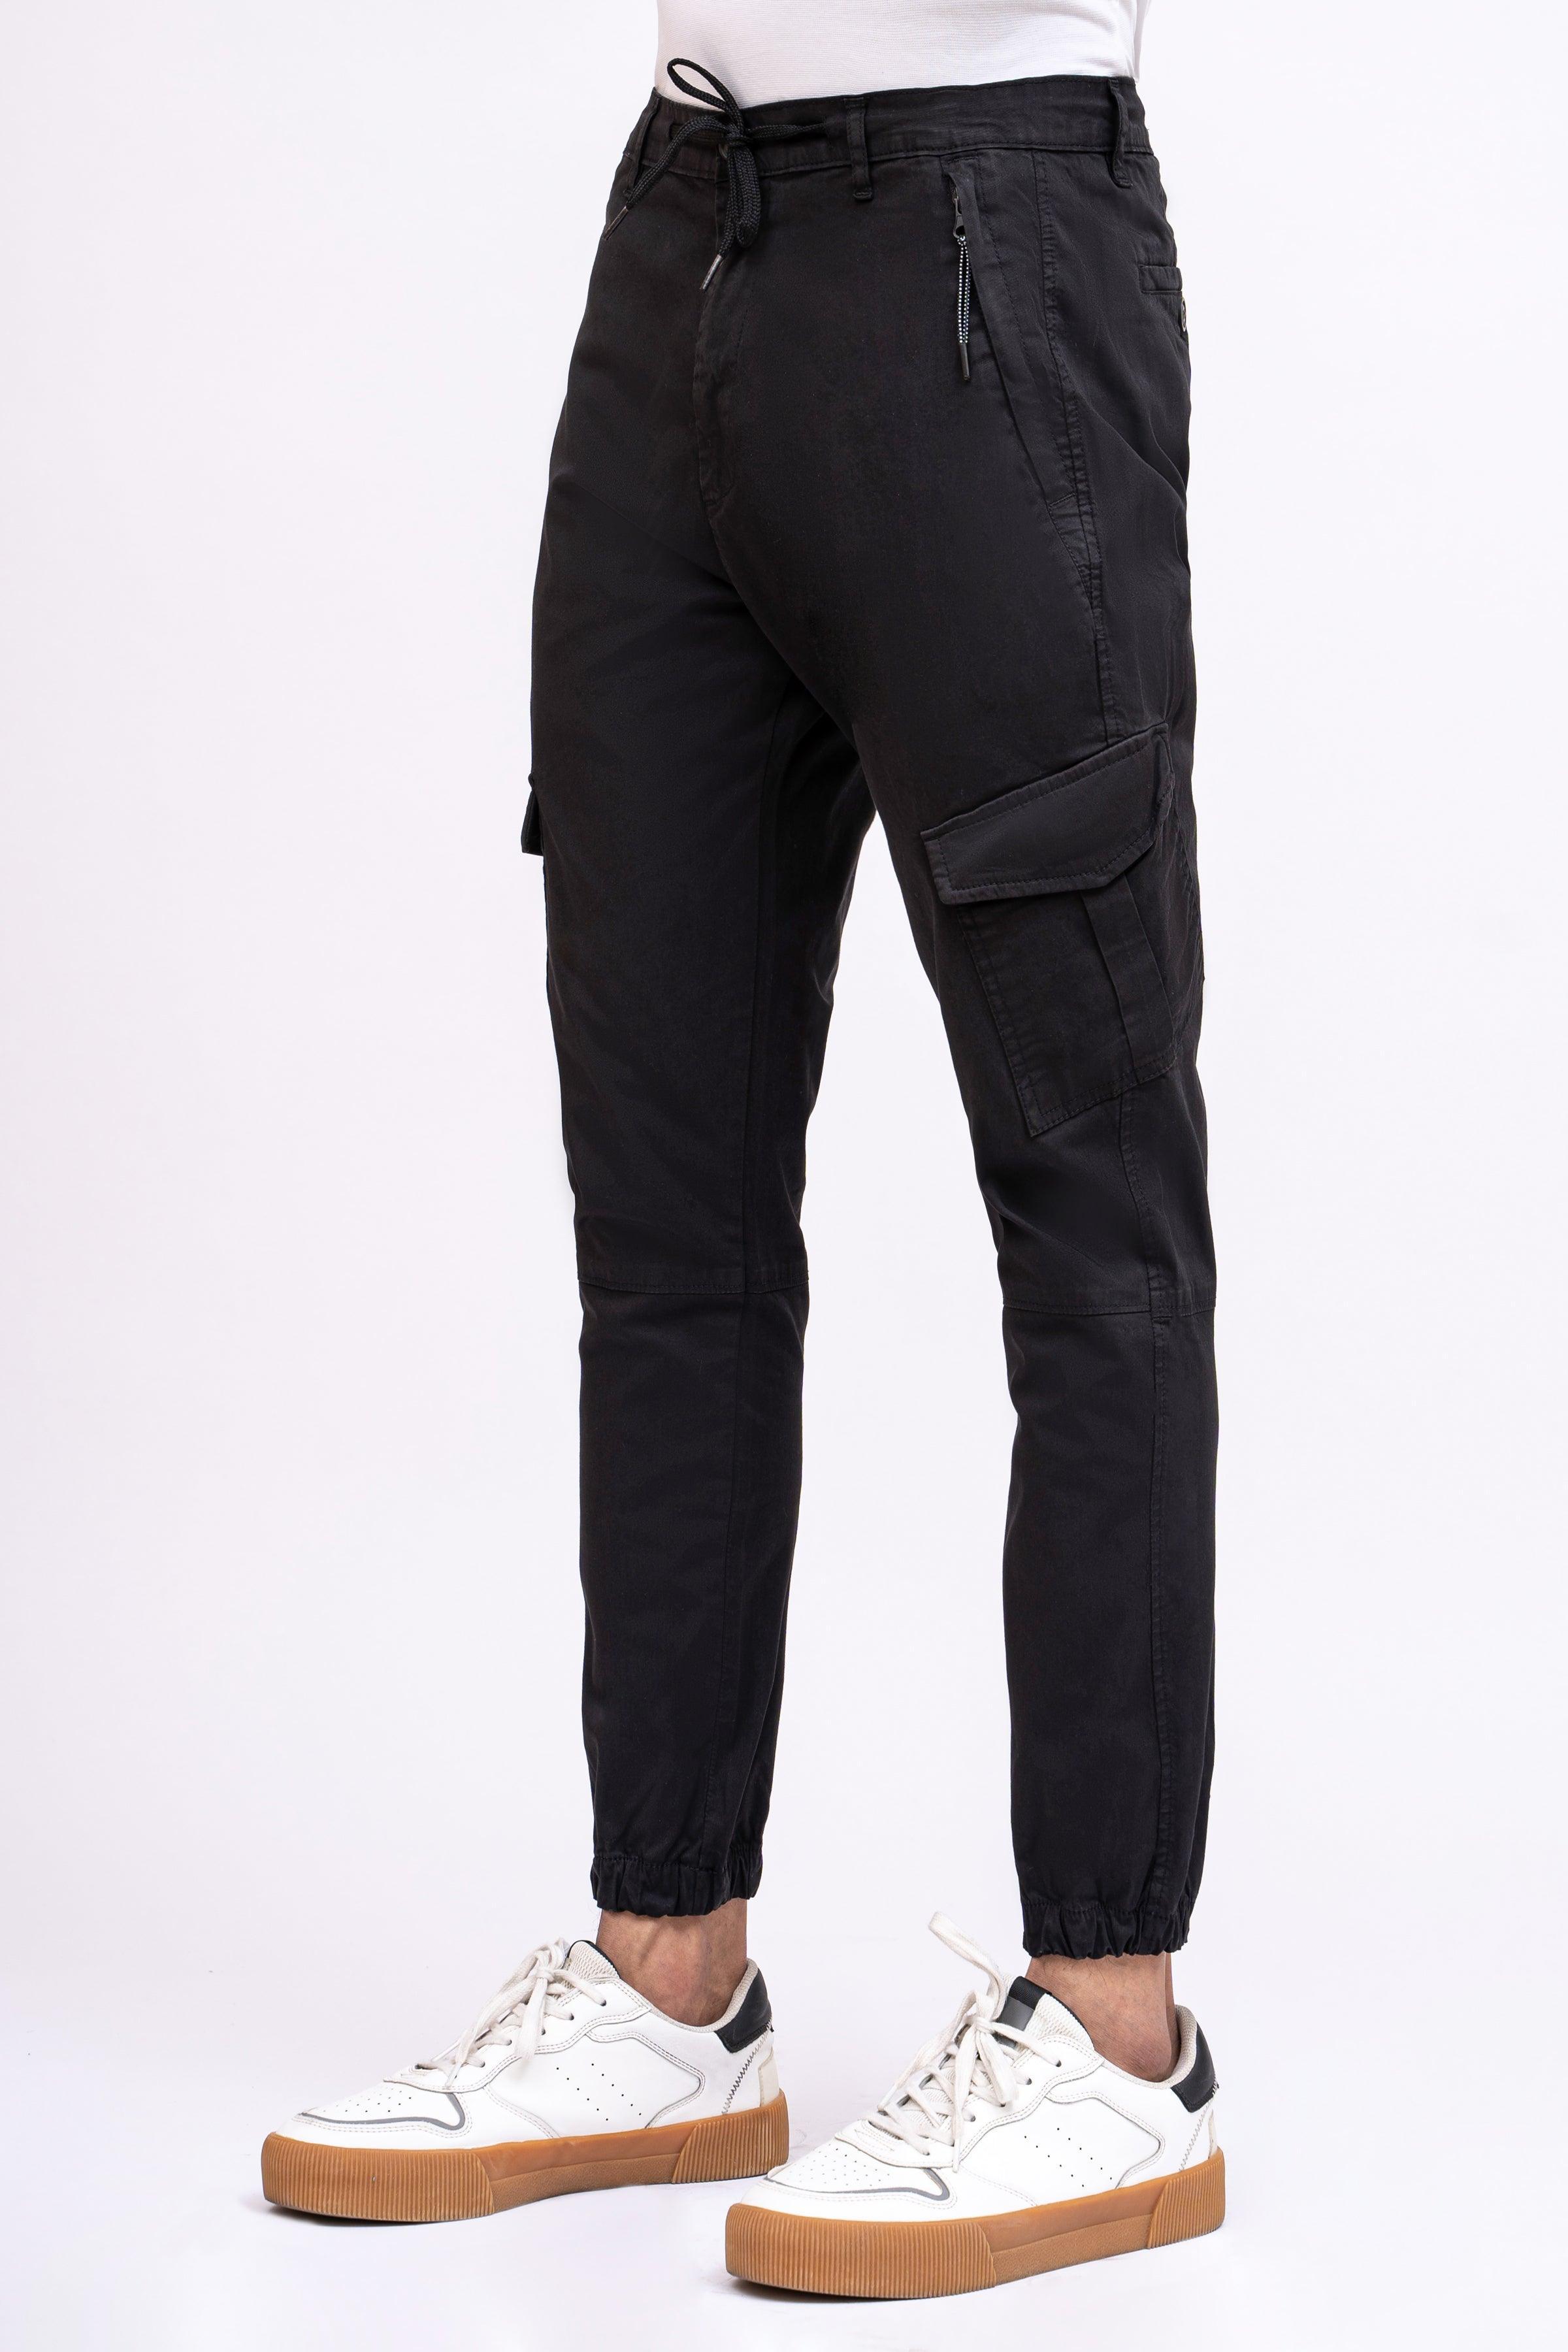 CASUAL JOGAR TROUSER JET BLACK at Charcoal Clothing